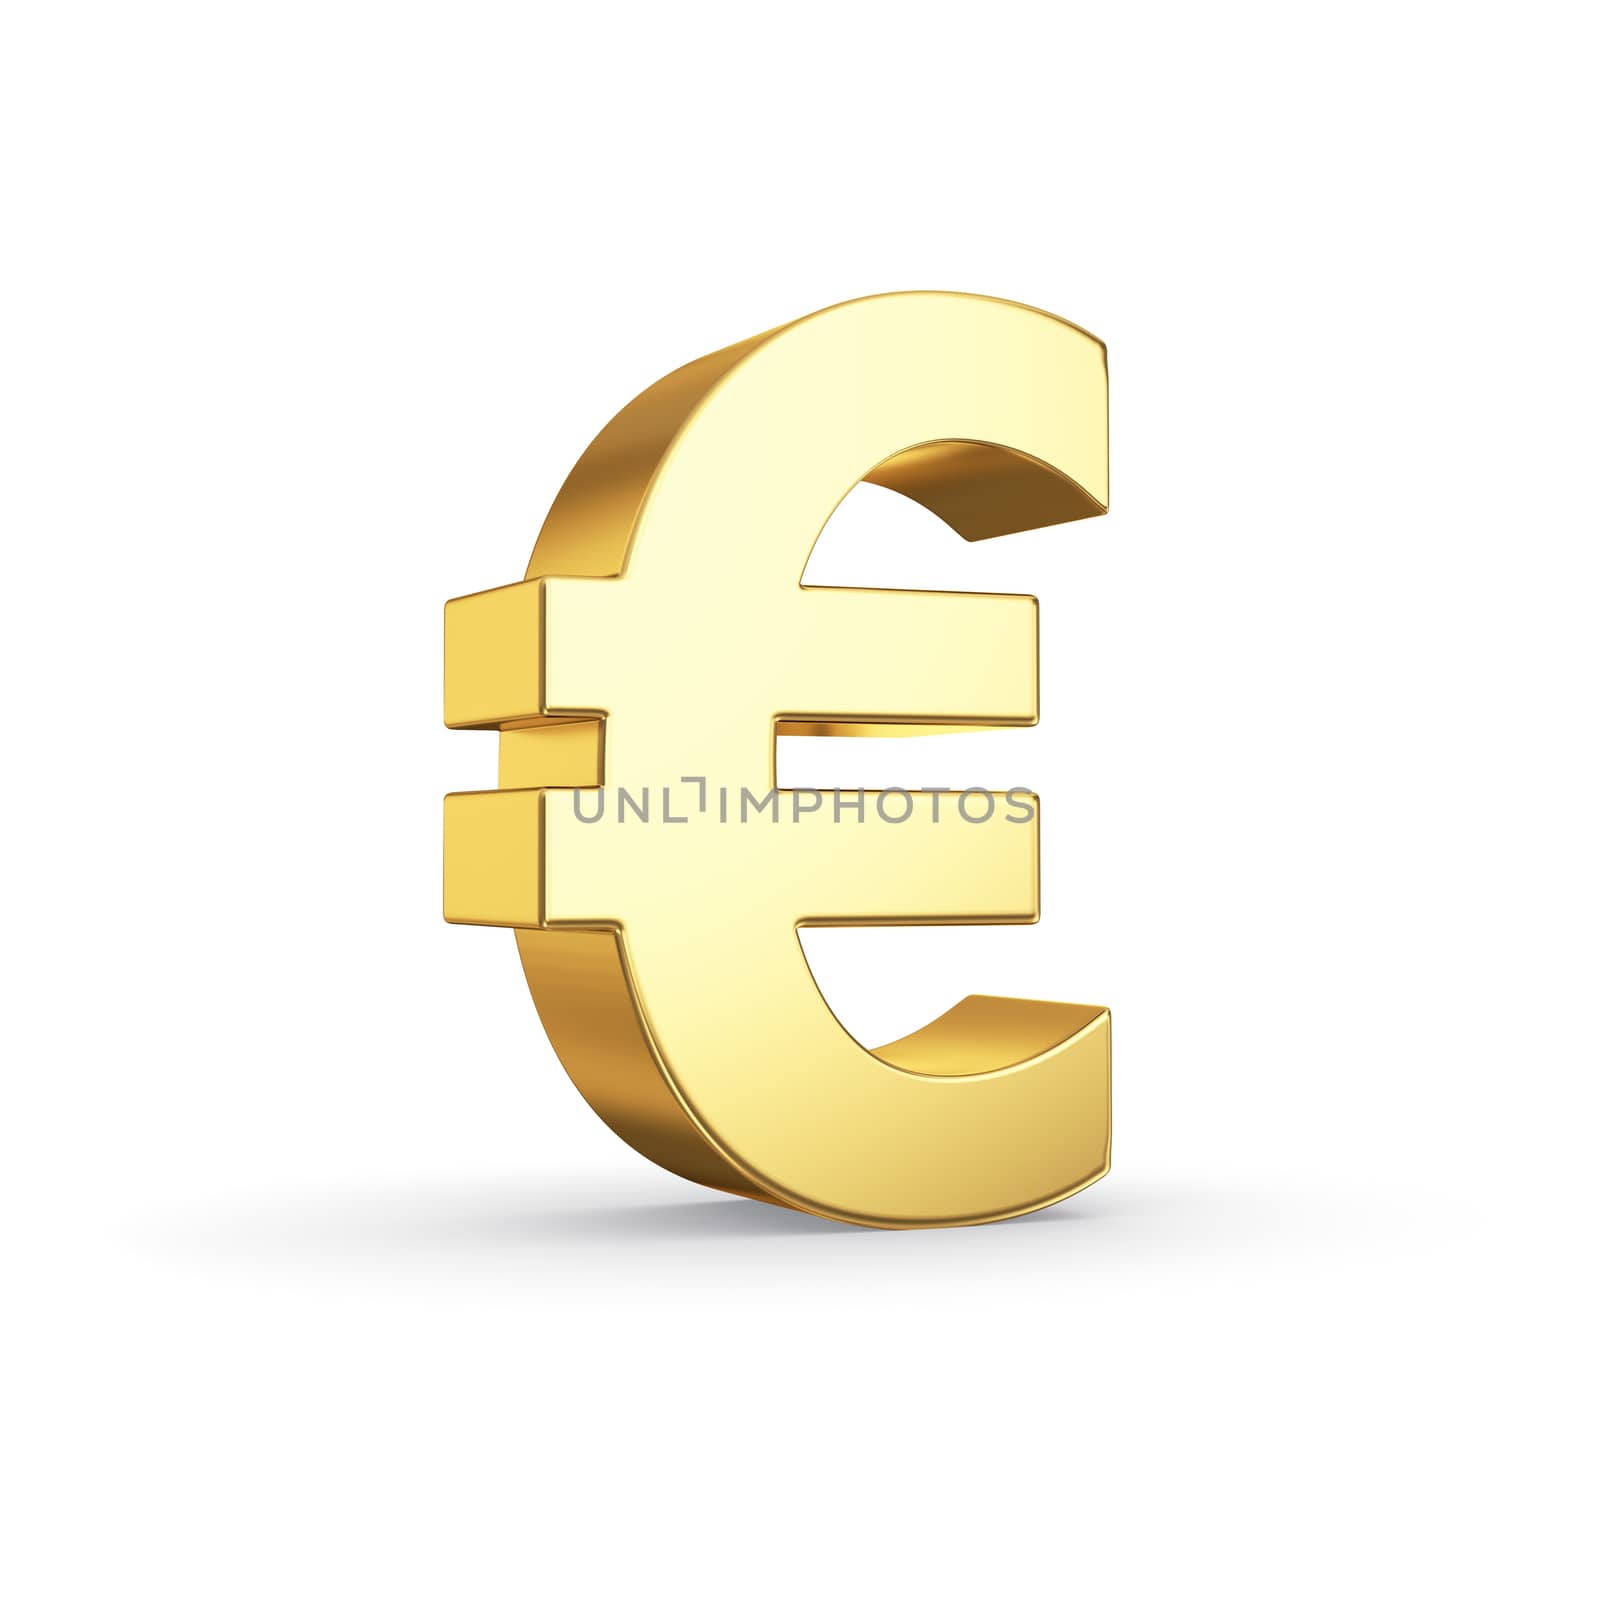 Golden euro  currency symbol - clipping path by 123dartist